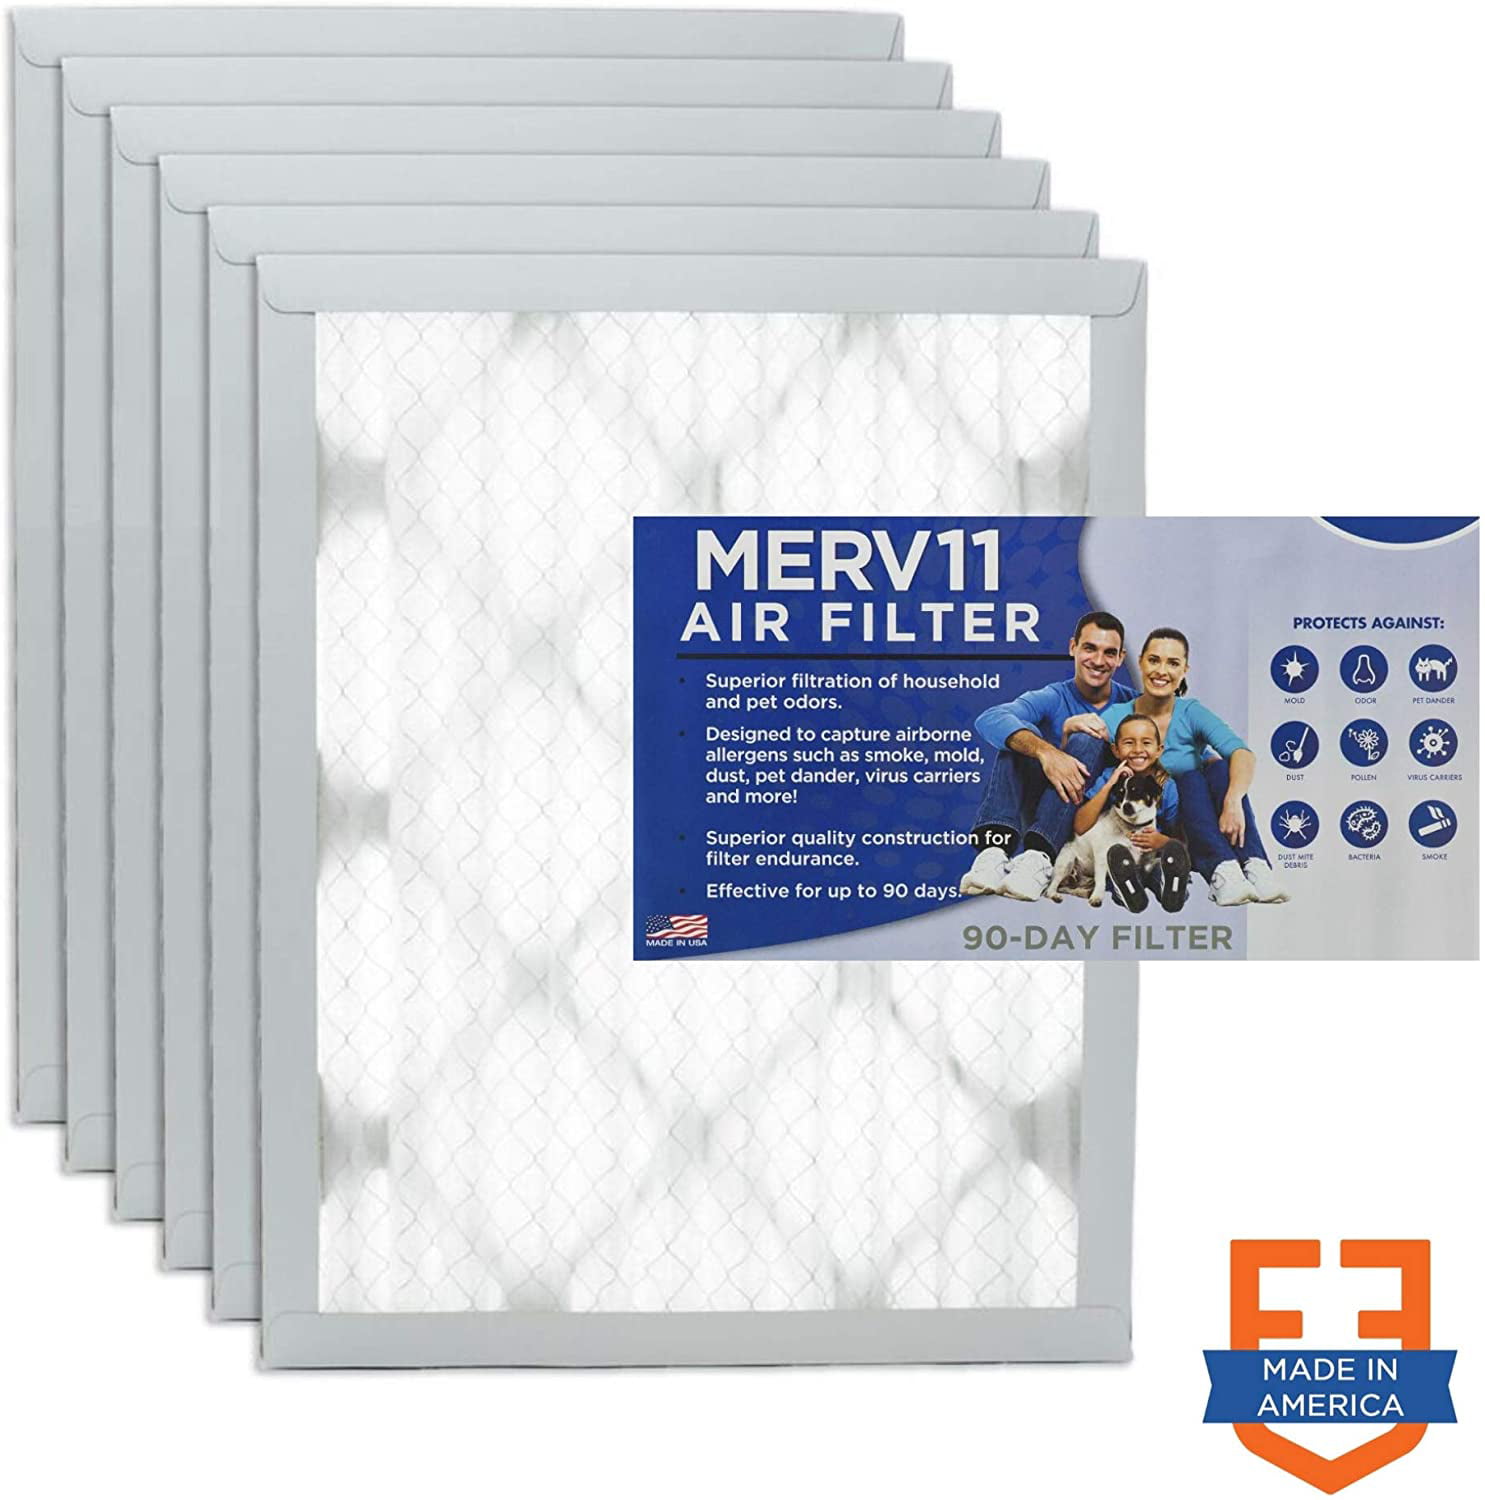 Merv 8 Filters Fast 8x8x1 Pleated Air Filter Made in the USA 1 AC Furnace Air Filters Actual Size: 8.00x8.00x0.75” 6 Pack 